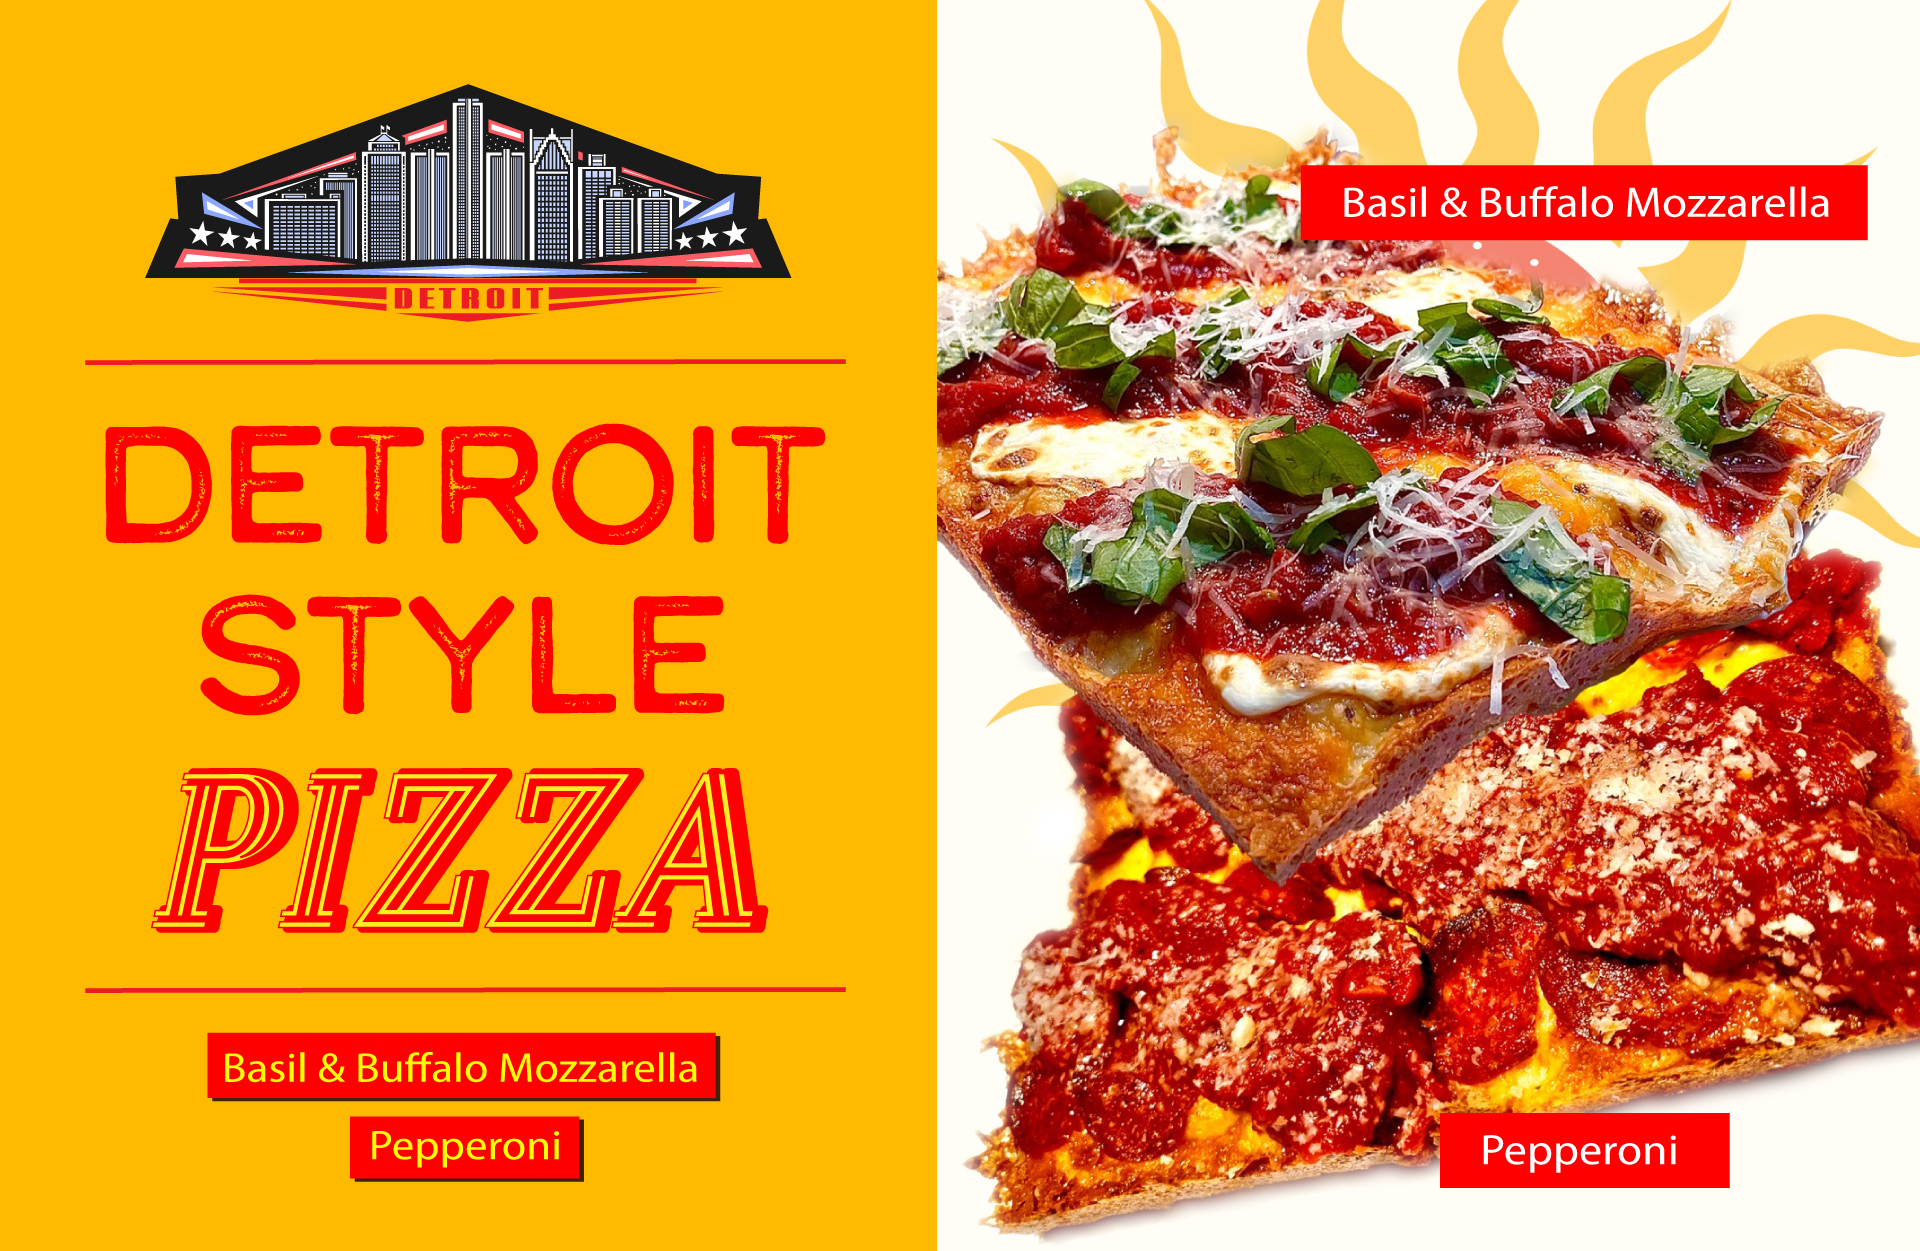 Detroit Style Pizza is HERE!